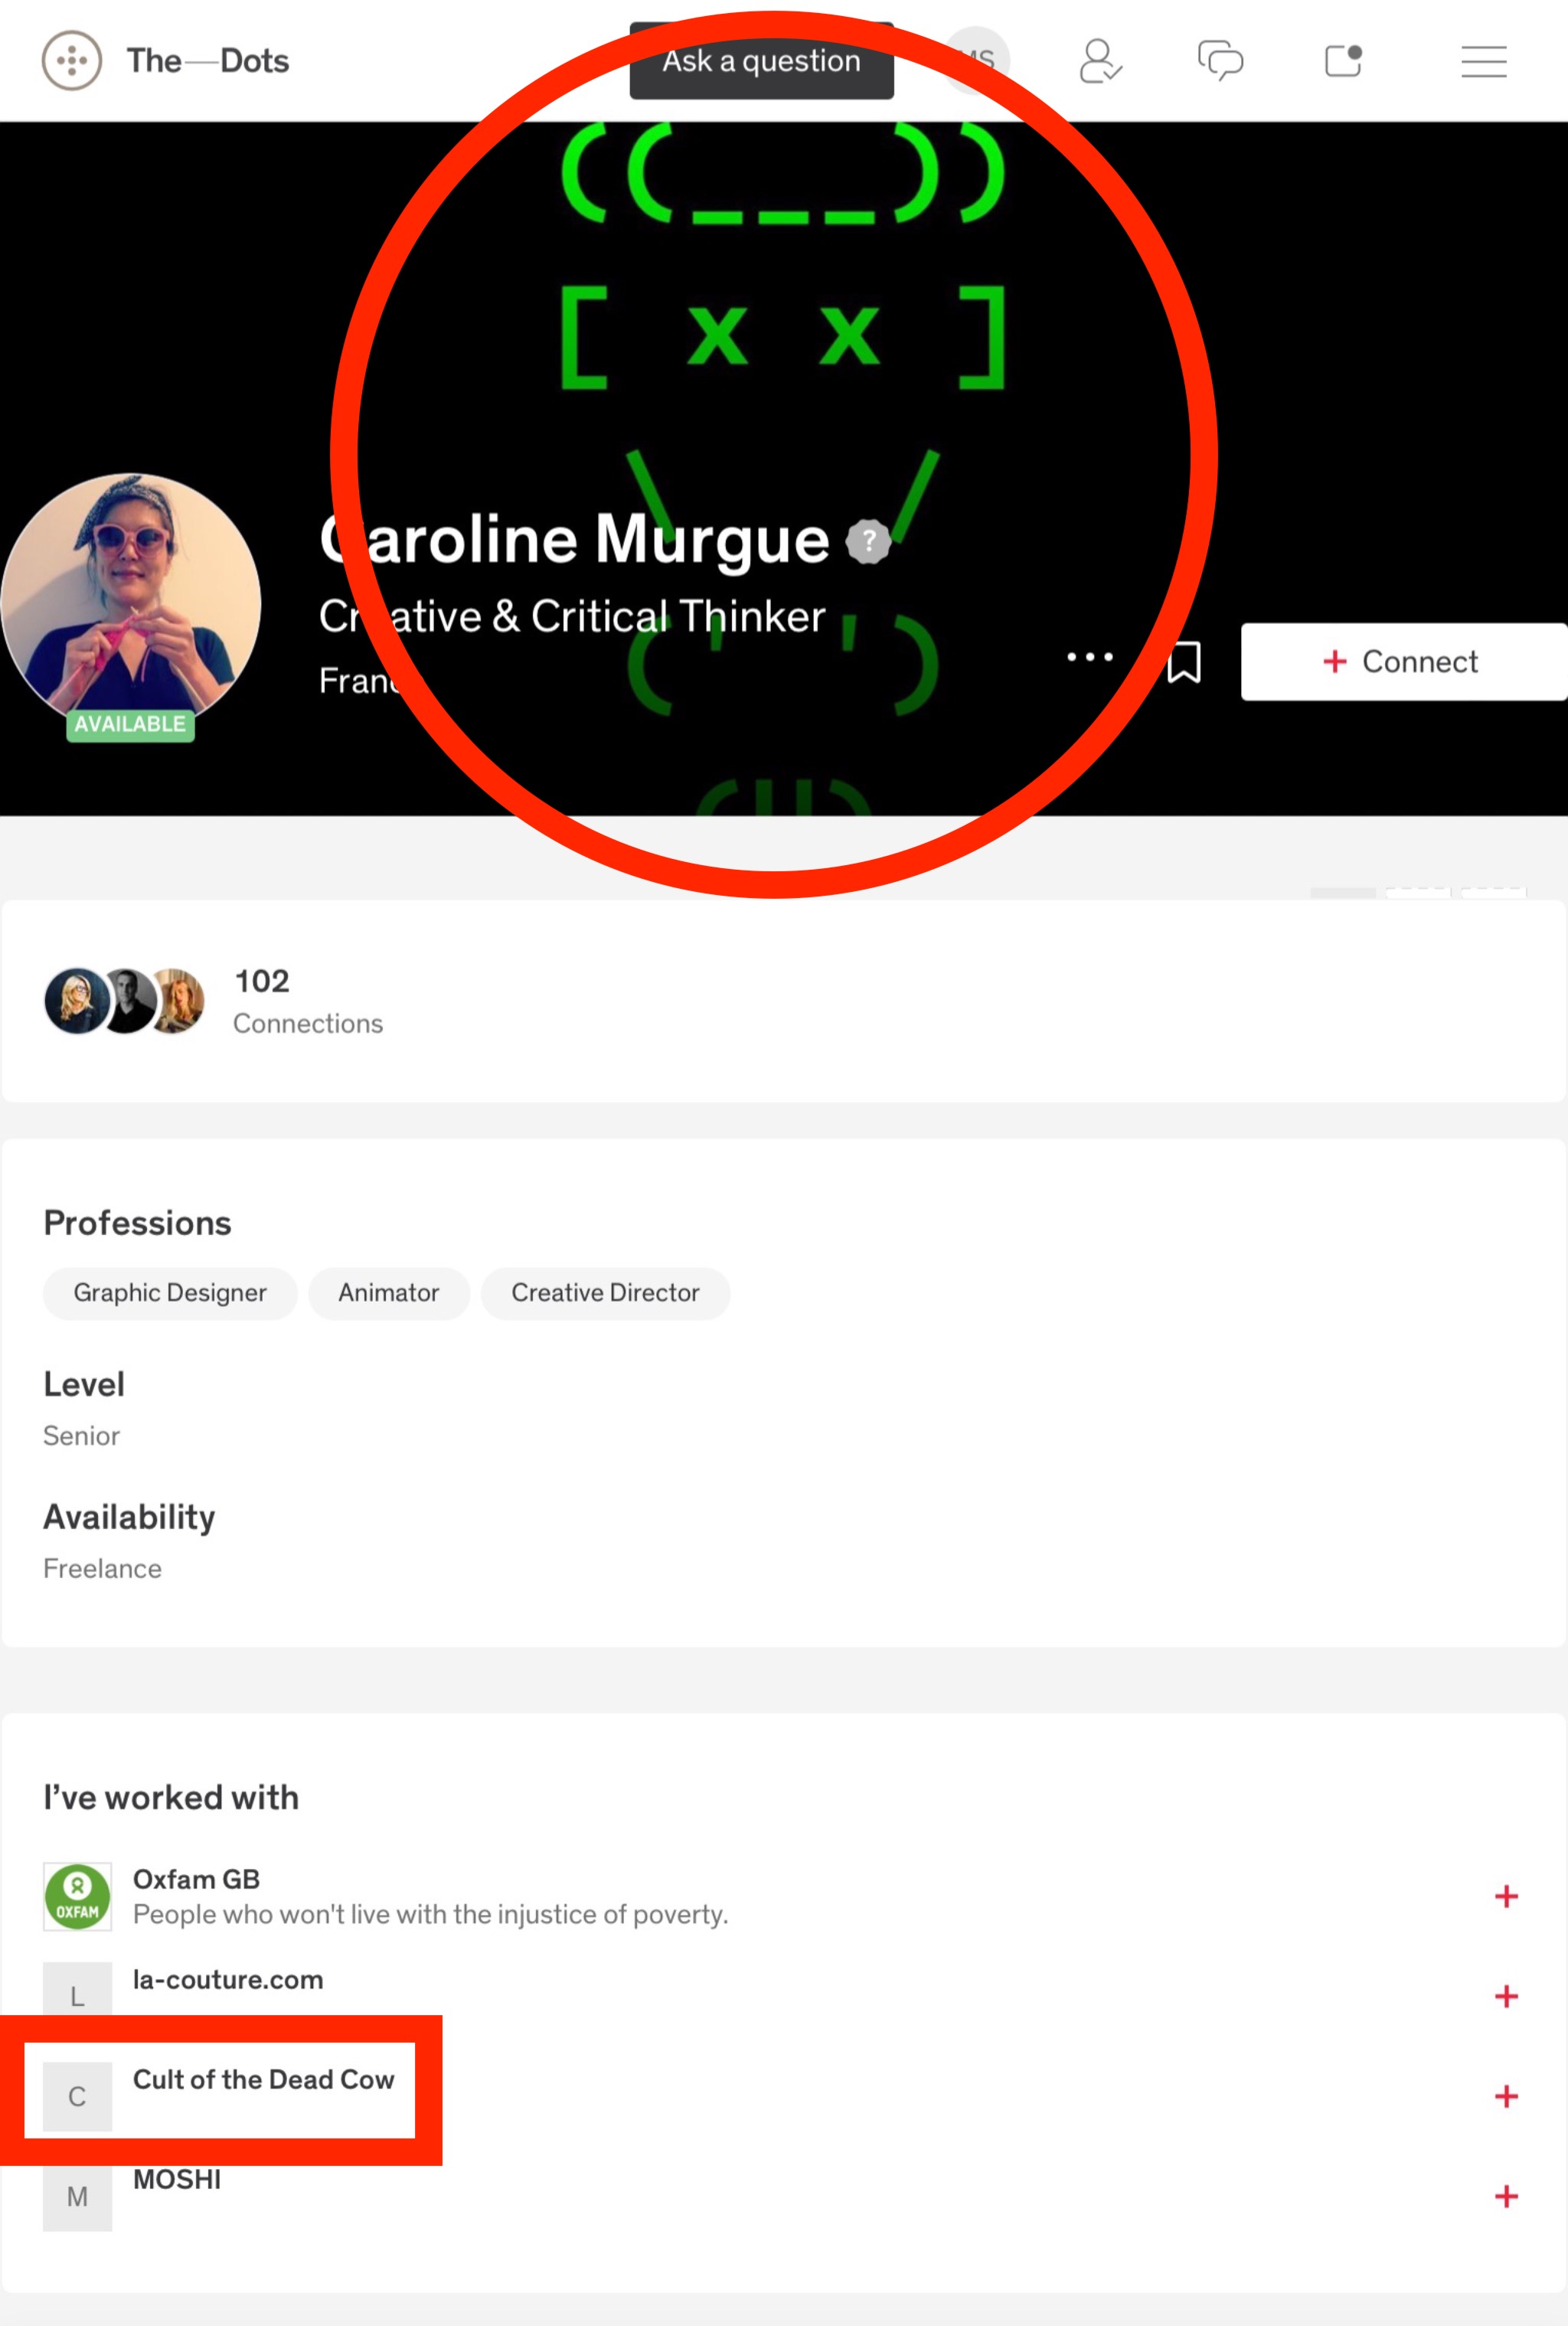 The October 23, 2022 profile page for Caroline Murgue on jobs site The-Dots. The banner image is the cDc ASCII cow skull logo, rendered in green text on a black background. Near the bottom of the page it reads: 'I've worked with [...] Cult of the Dead Cow'